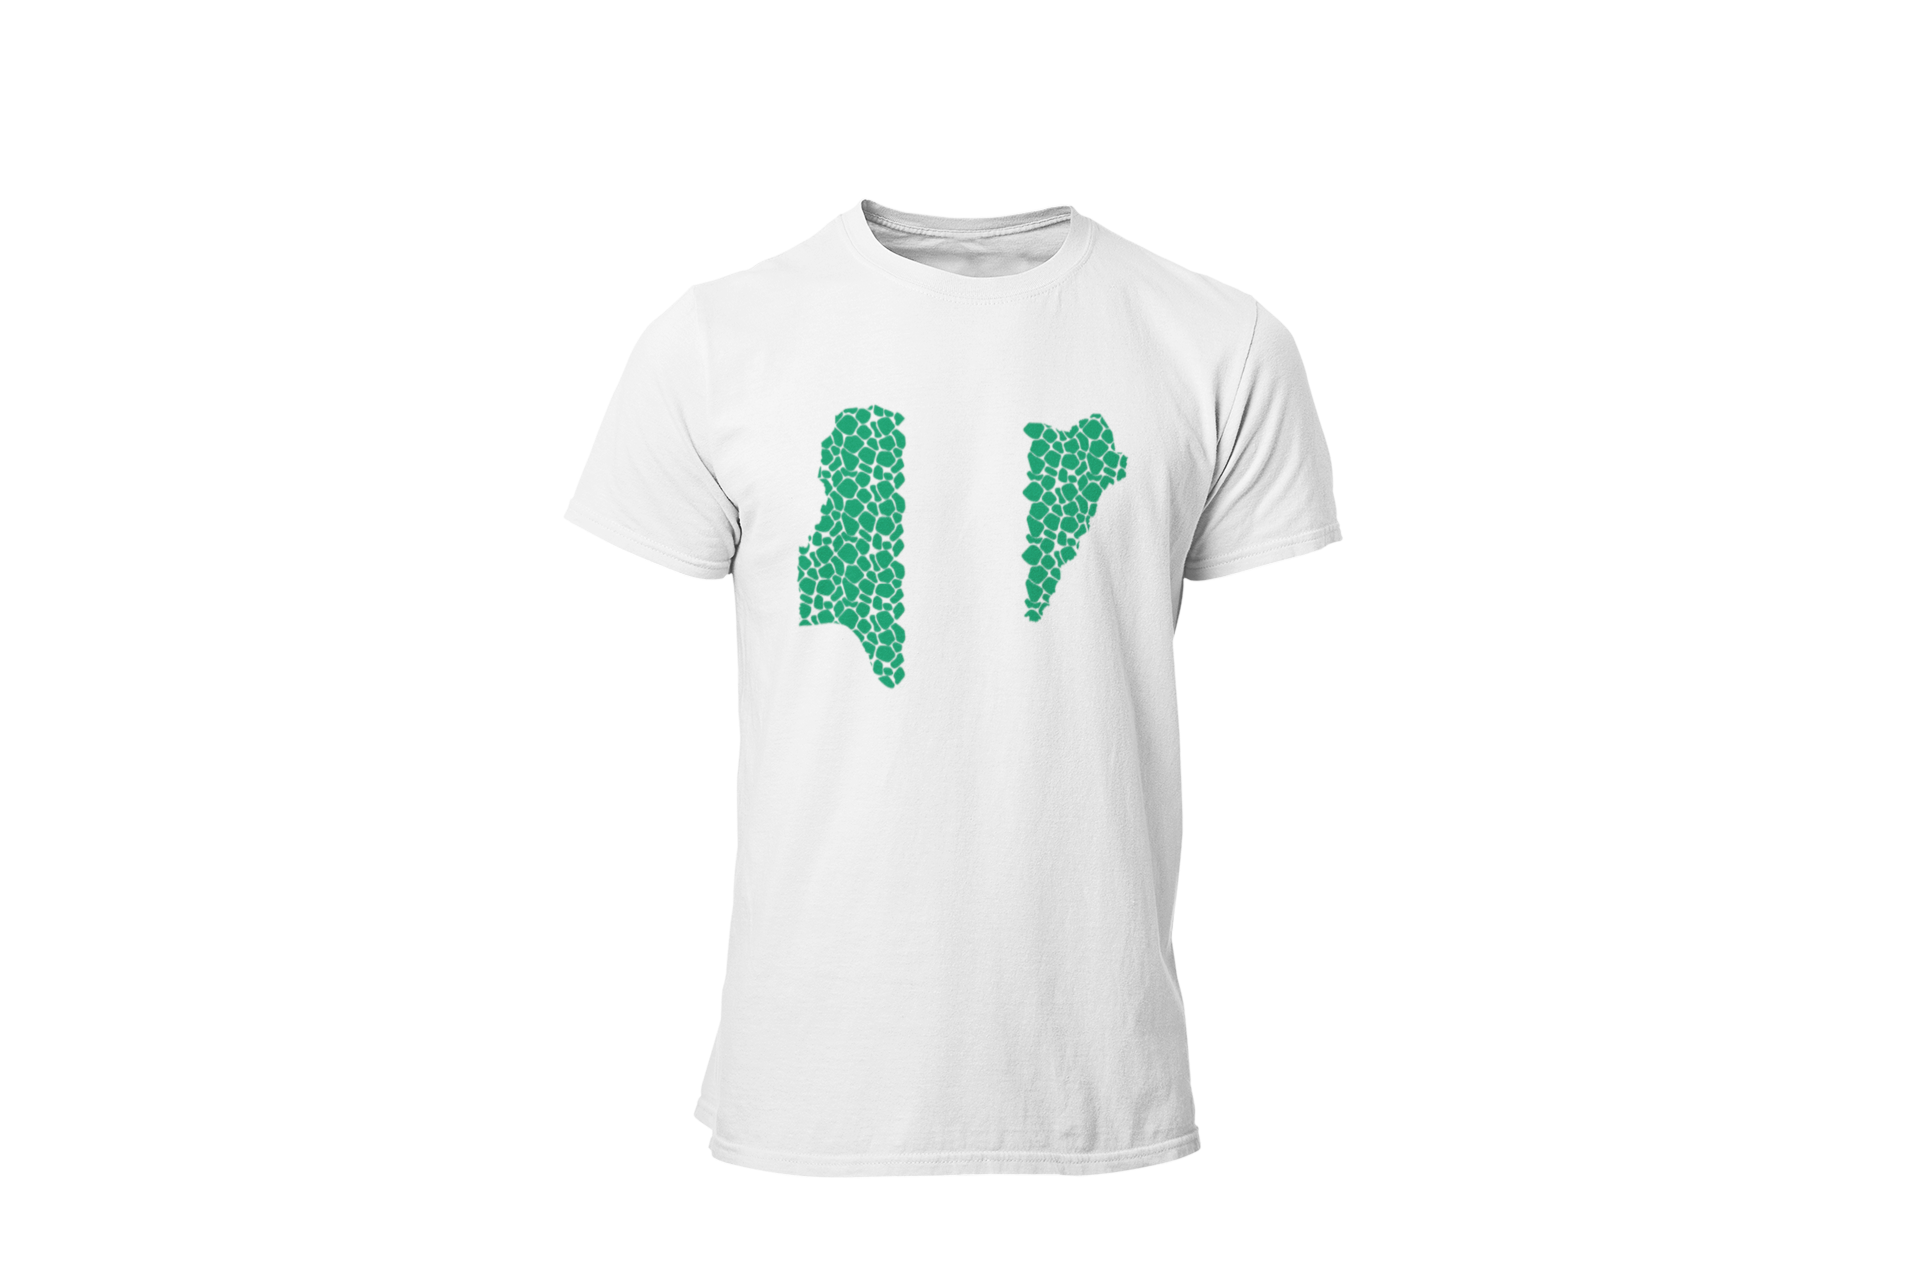 From the Soils of Nigeria T-shirt